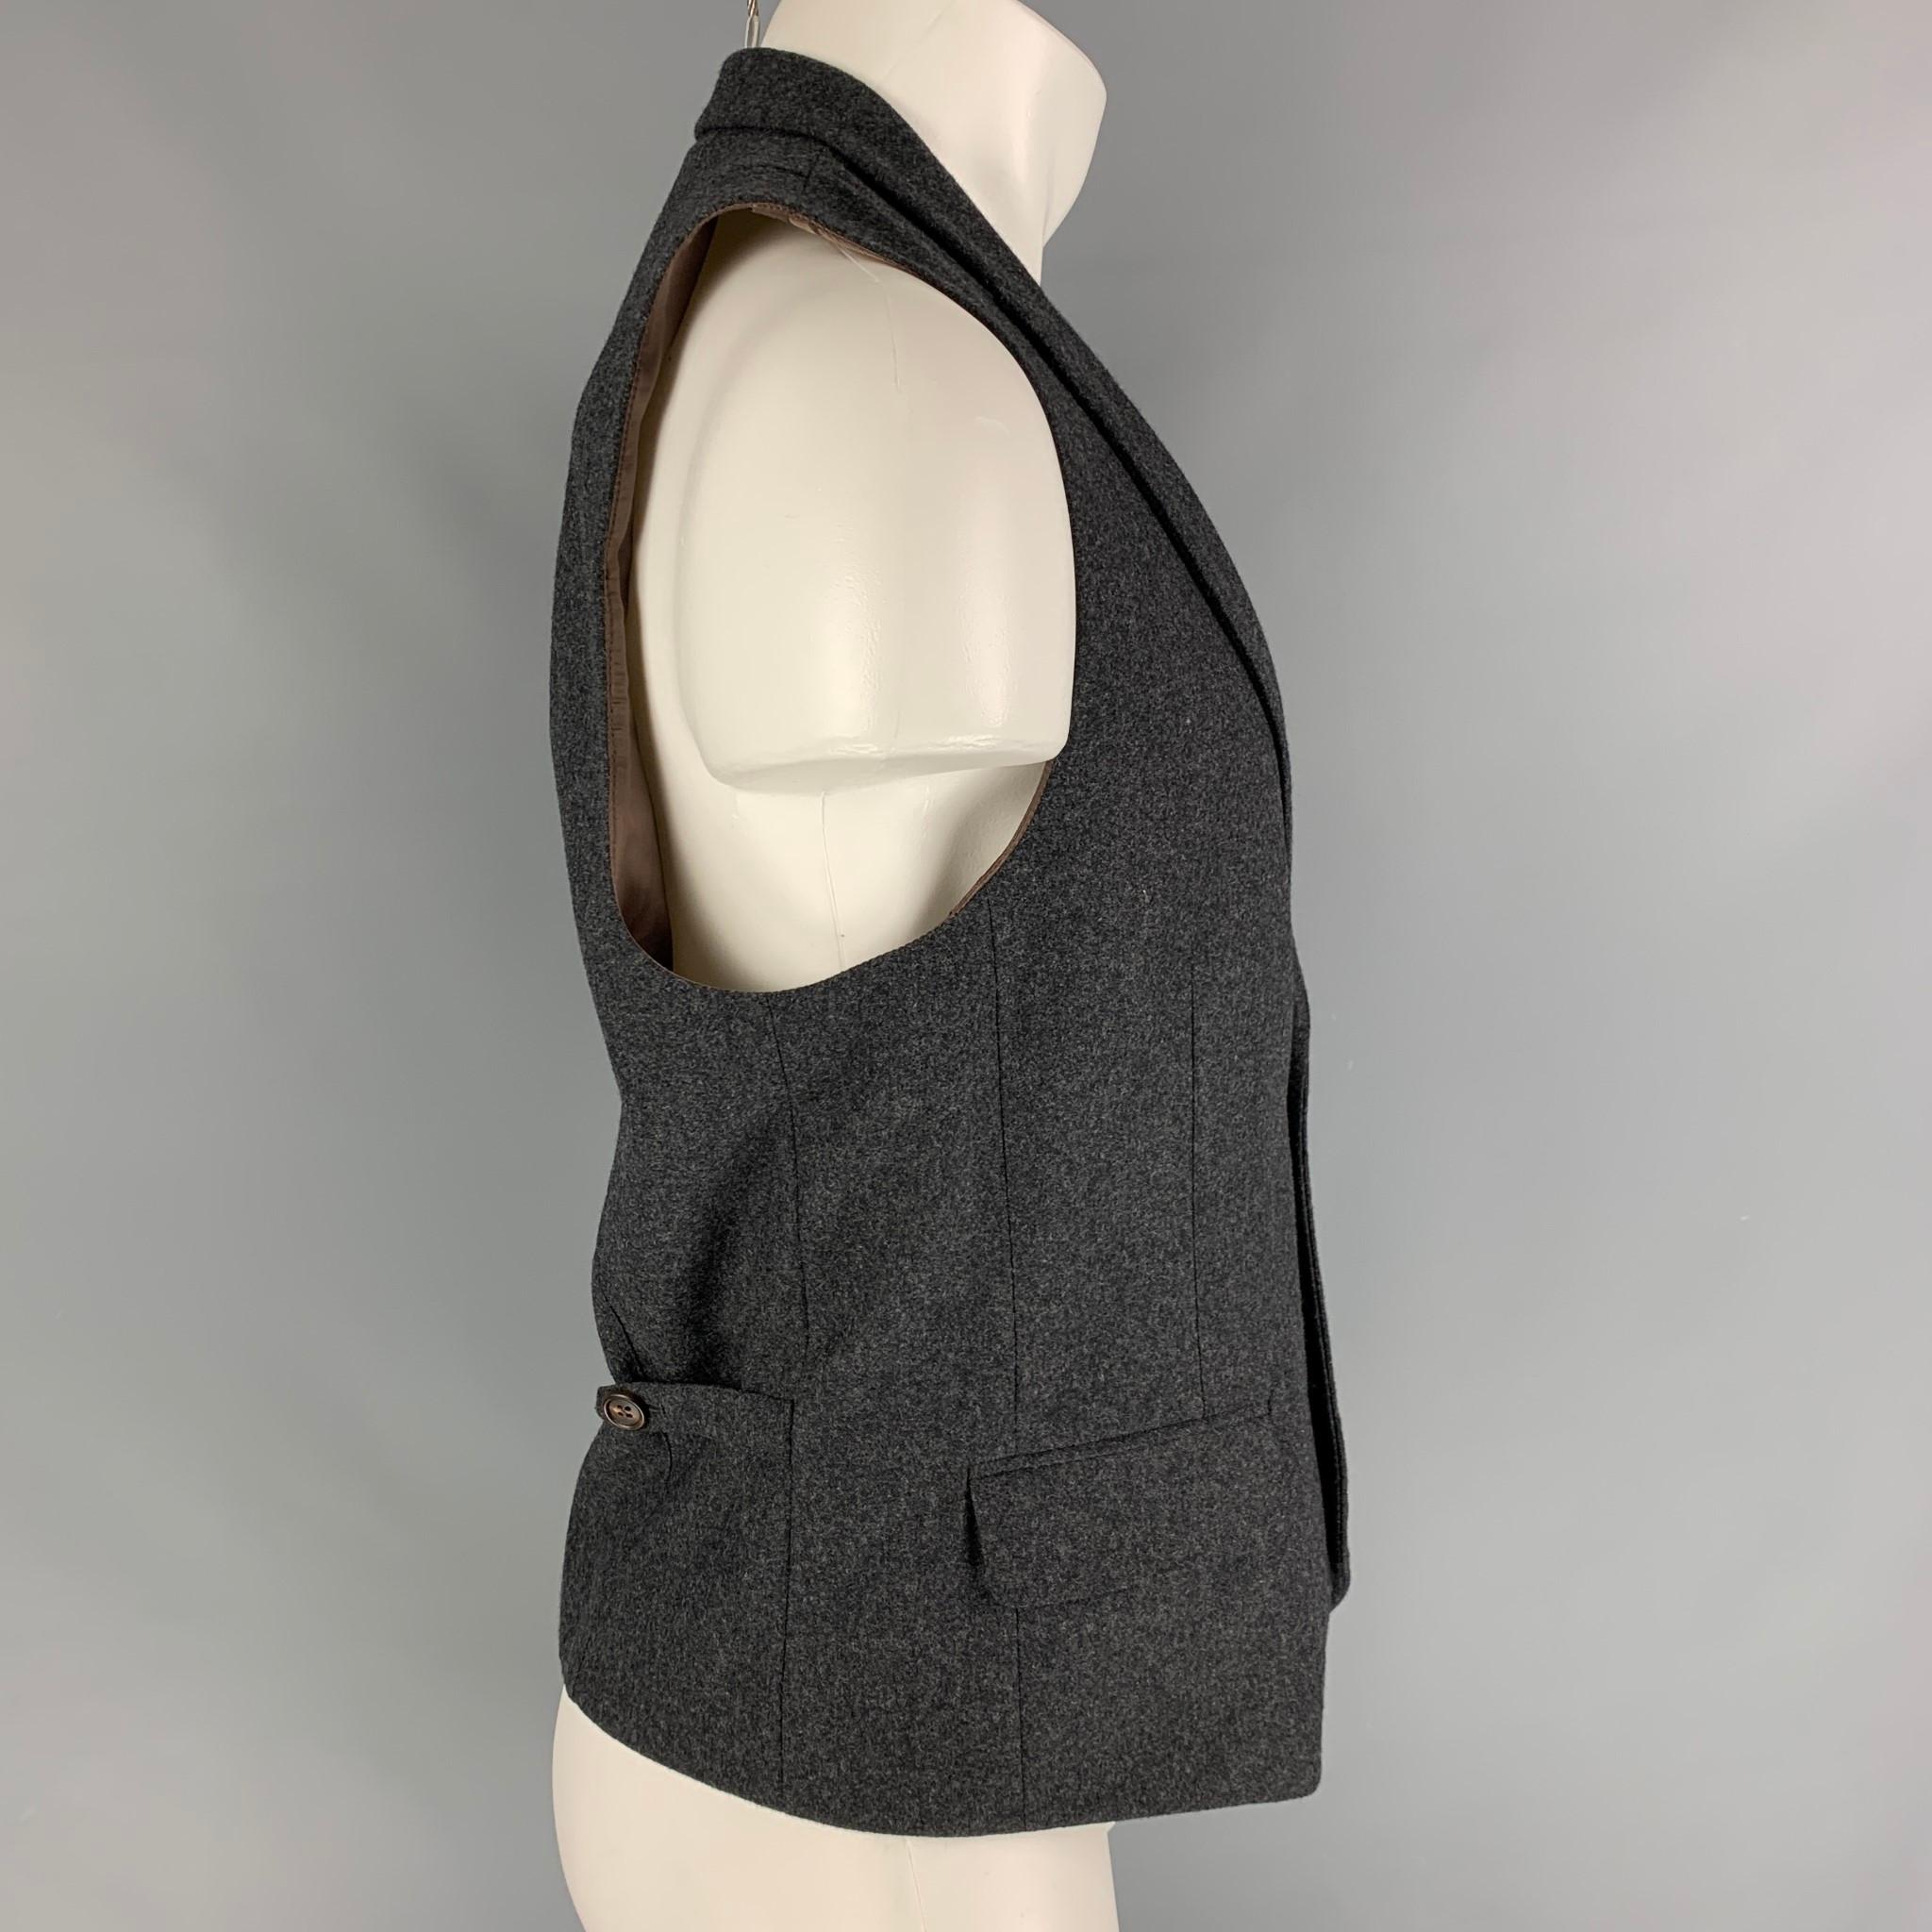 BRUNELLO CUCINELLI vest comes in a charcoal heather wool featuring a notch lapel, side tabs, flap pockets, and a buttoned closure. Made in Italy. 

Very Good Pre-Owned Condition.
Marked: 50

Measurements:

Shoulder: 14 in.
Chest: 38 in.
Length: 23